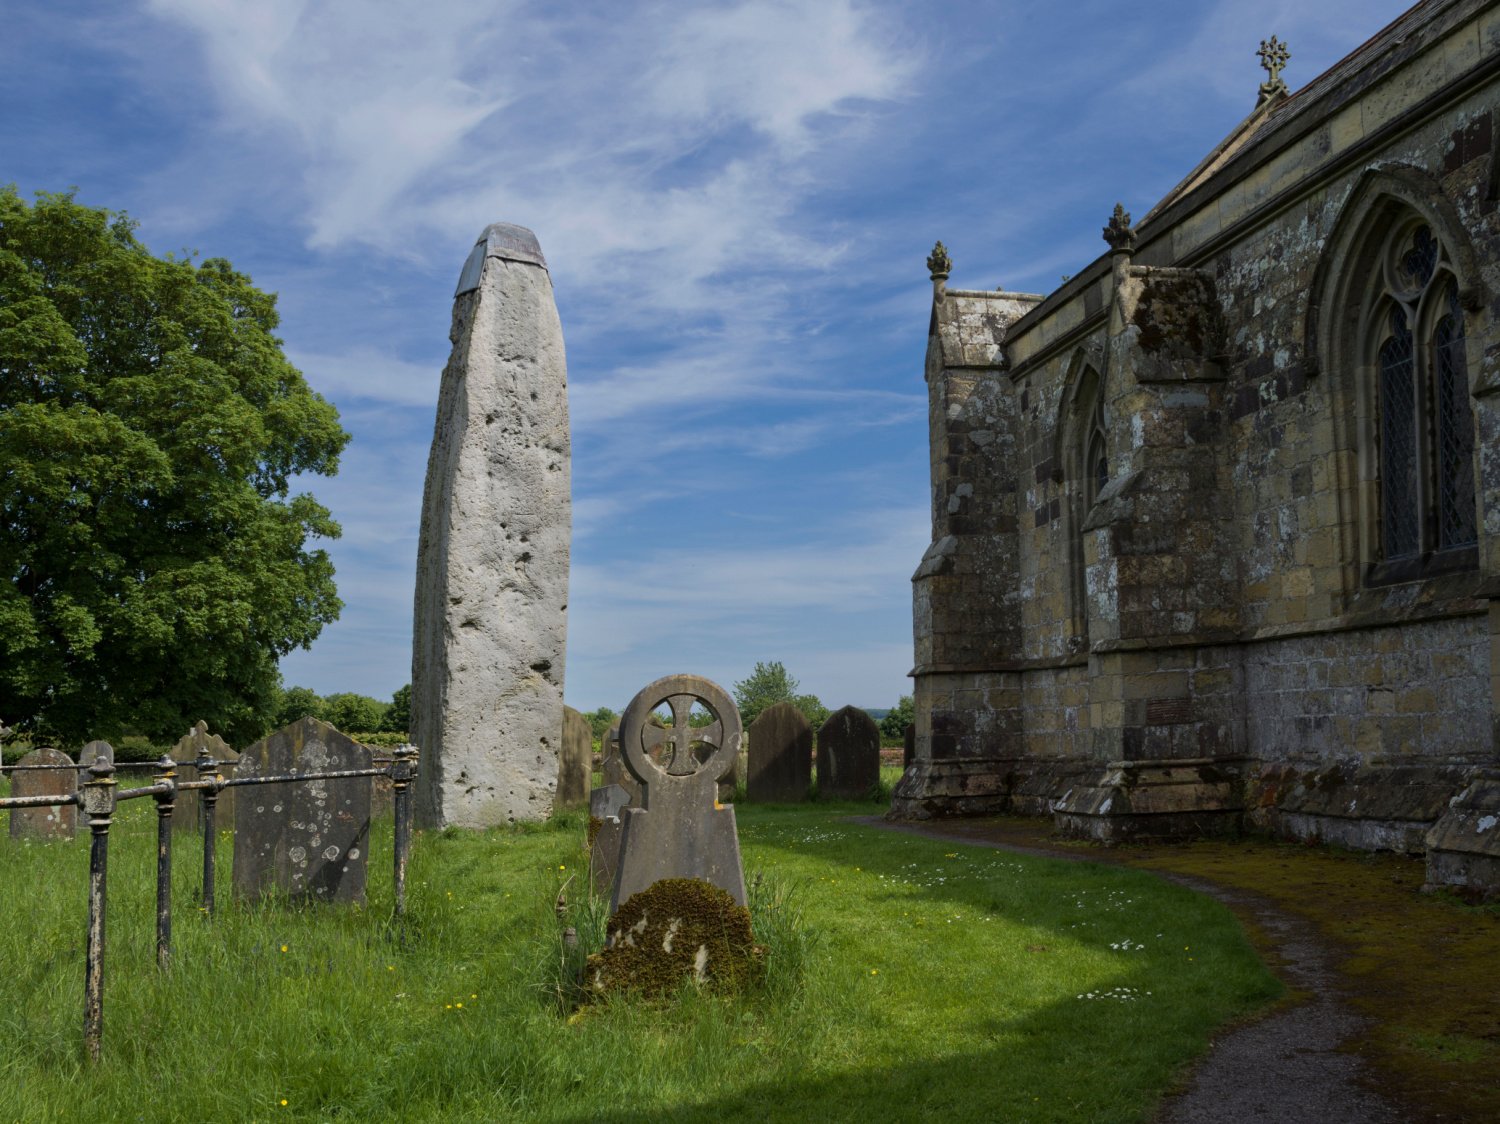 Image name rudston monolith east yorkshire the 2 image from the post A look at the history of the Rudston Monolith, with Dr Emma Wells in Yorkshire.com.